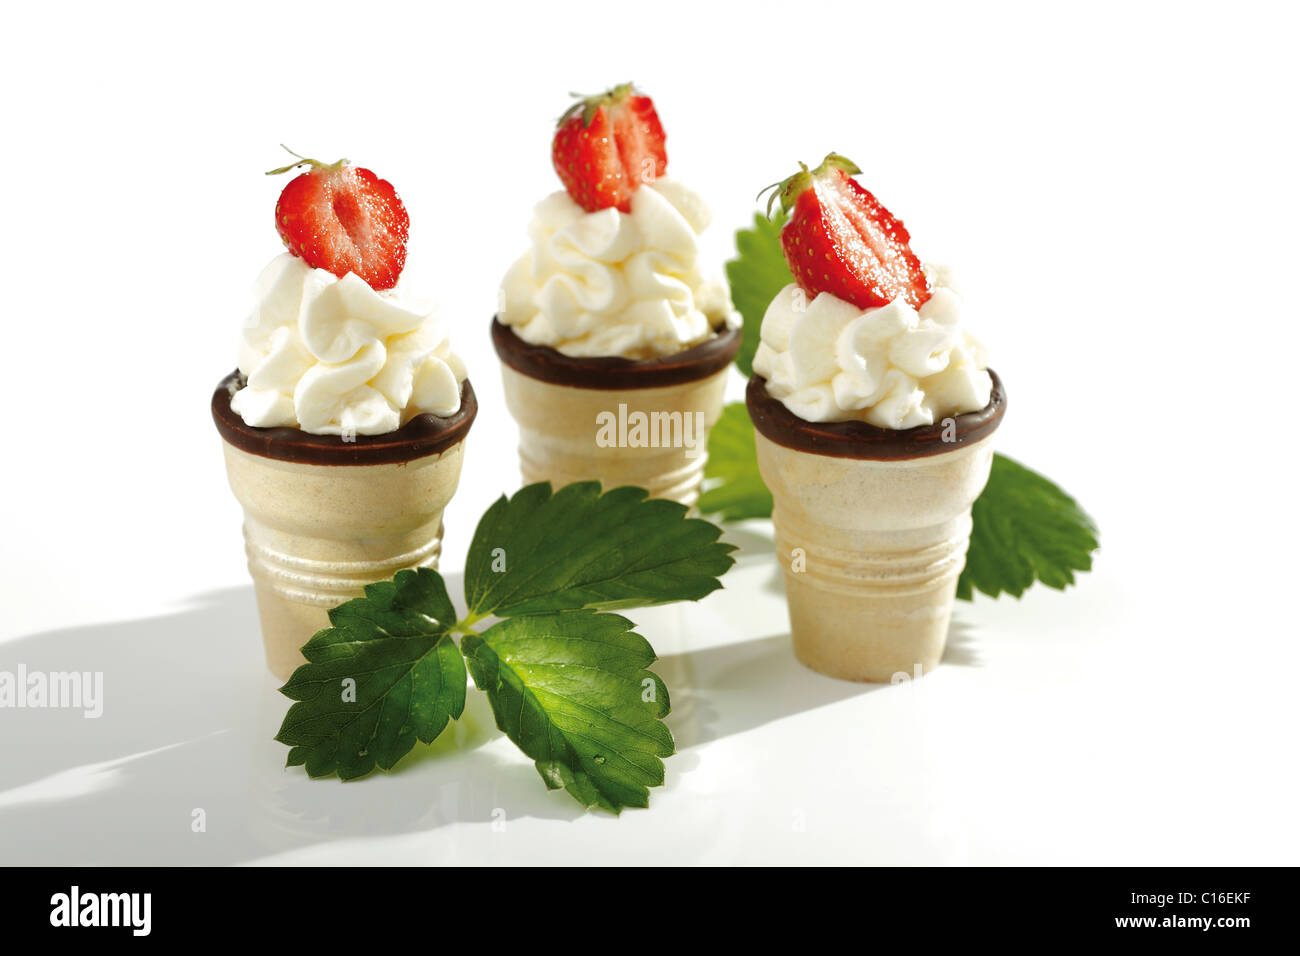 Wafer ice-cream cones with cream and strawberries Stock Photo